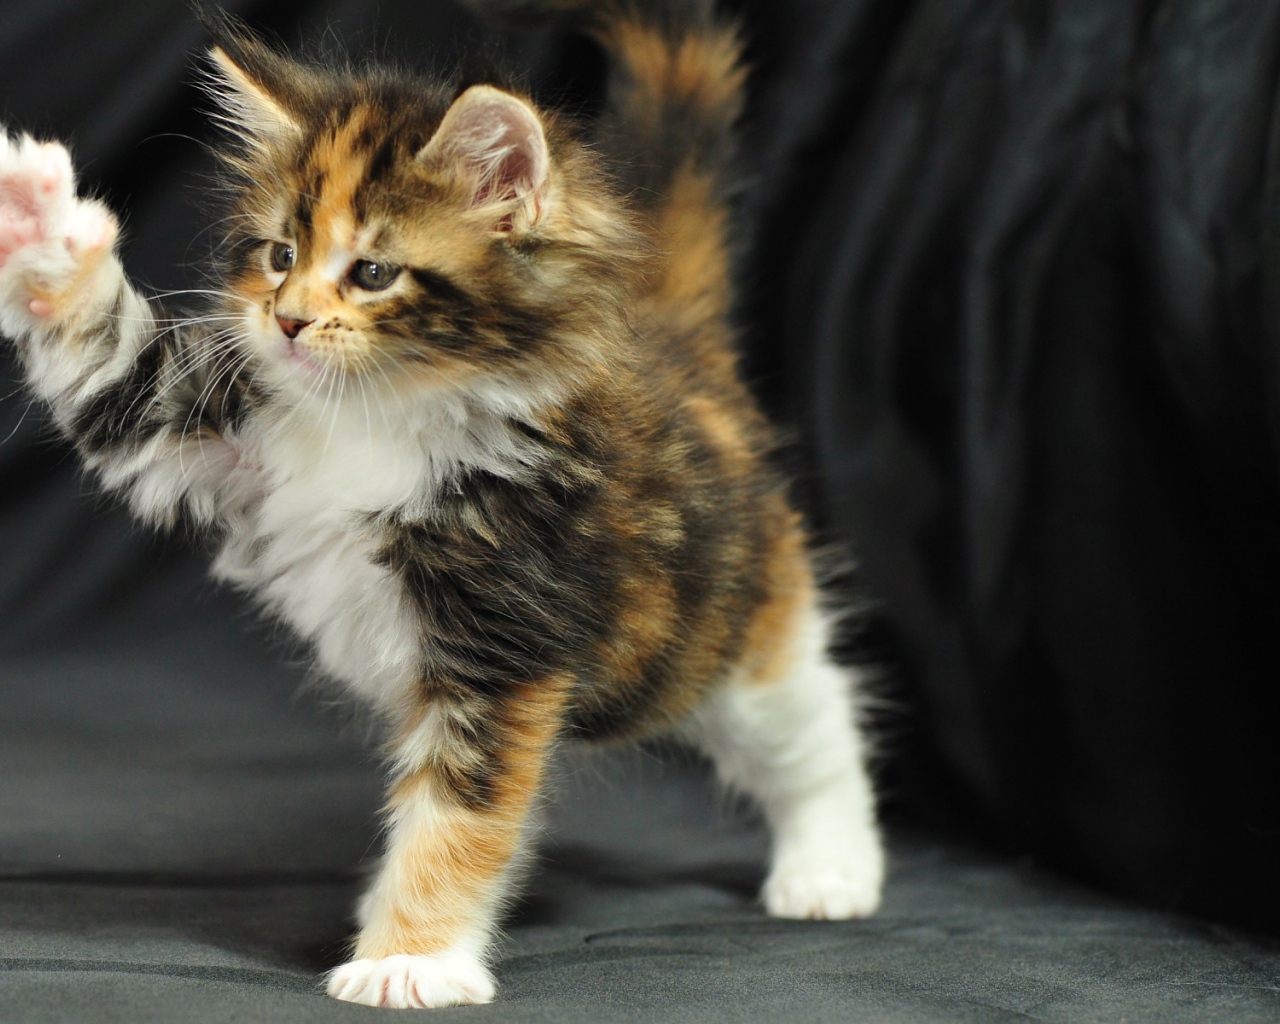 Cute little cat Maine Coon plays